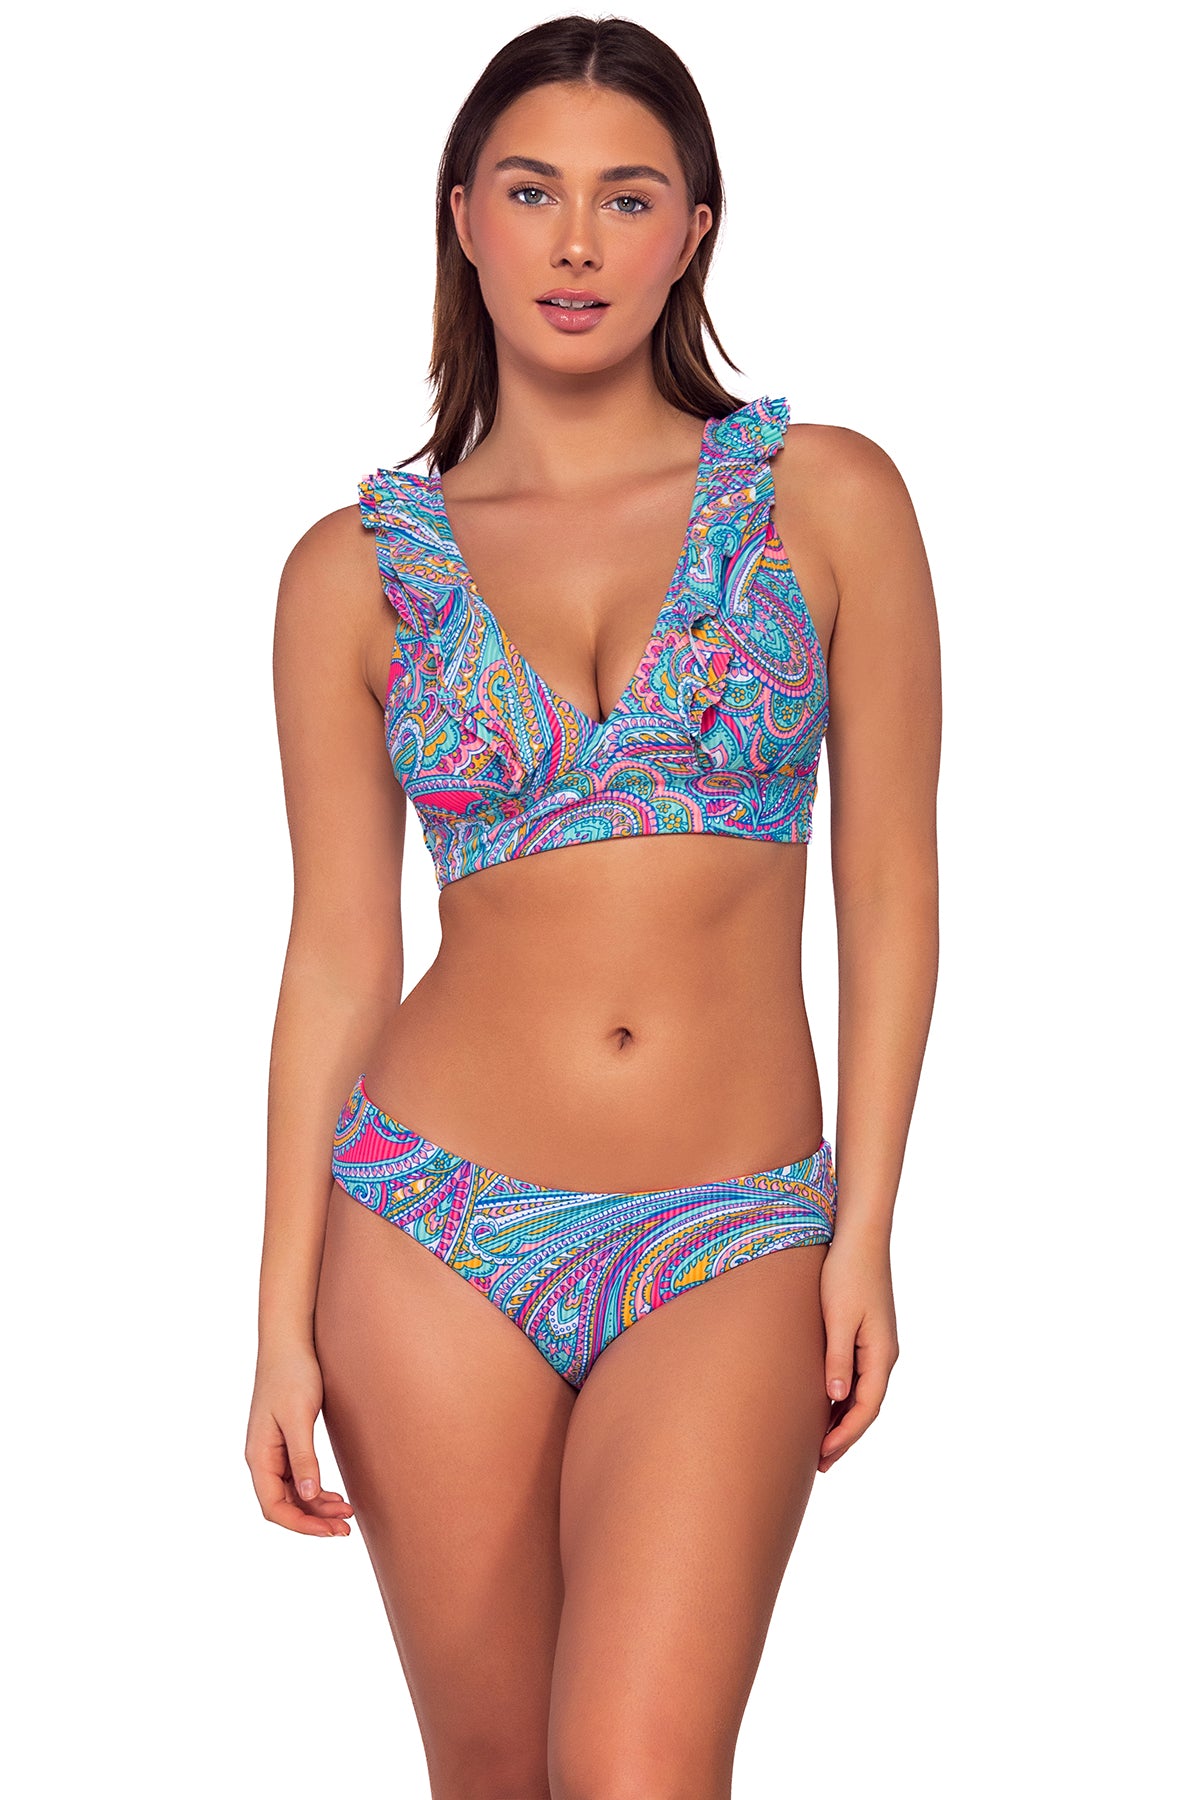 Front view of Sunsets Paisley Pop Willa Wireless Top with matching Alana Reversible Hipster bikini bottom